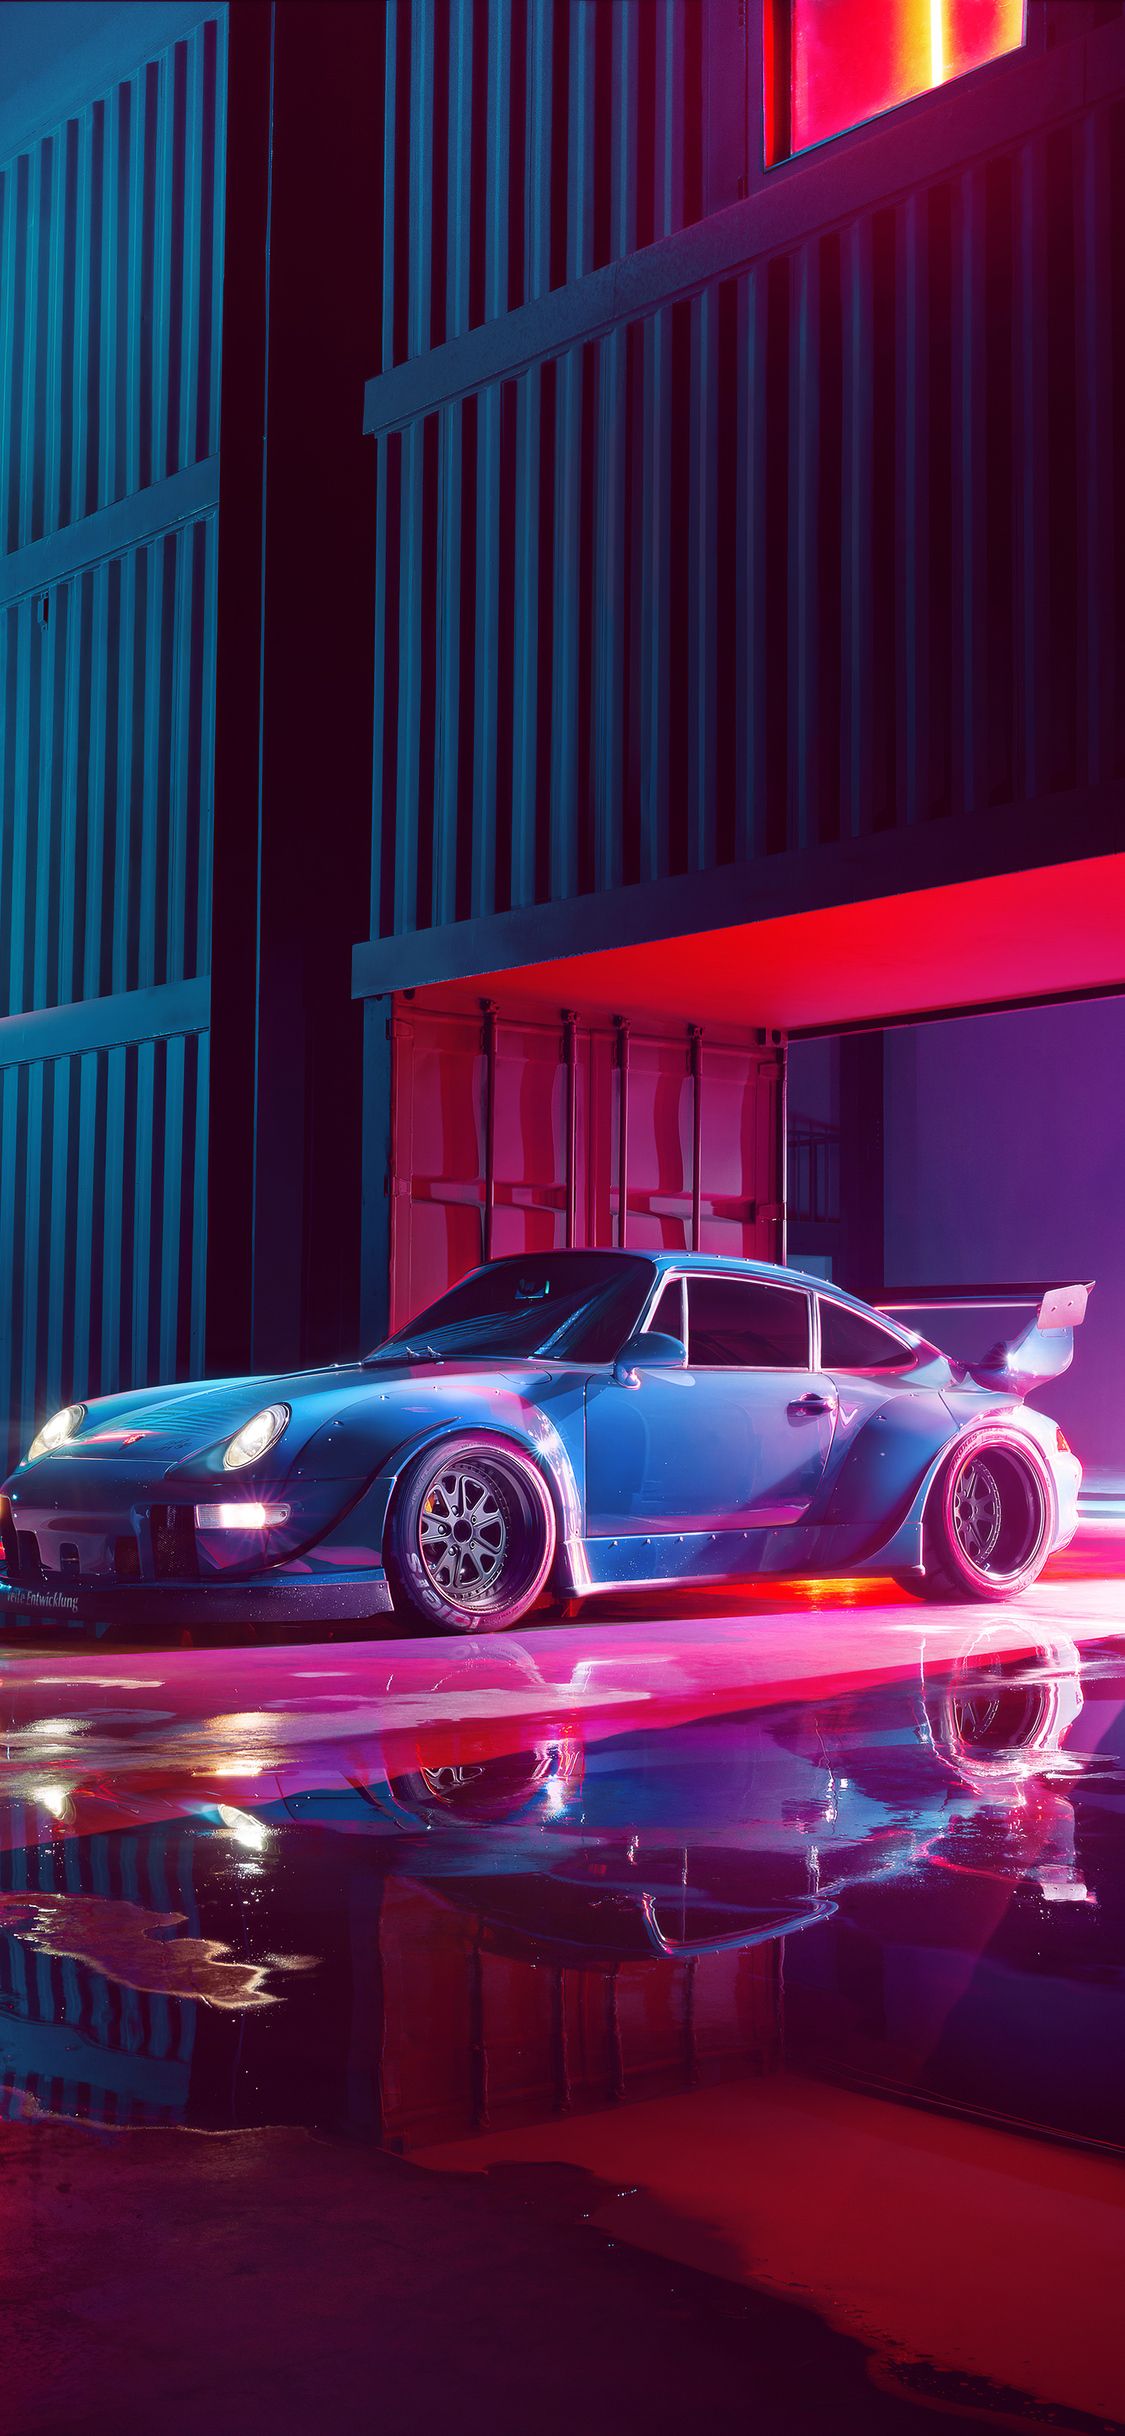 Porsche Rwb Concept 4k iPhone XS, iPhone iPhone X HD 4k Wallpaper, Image, Background, Photo and Picture